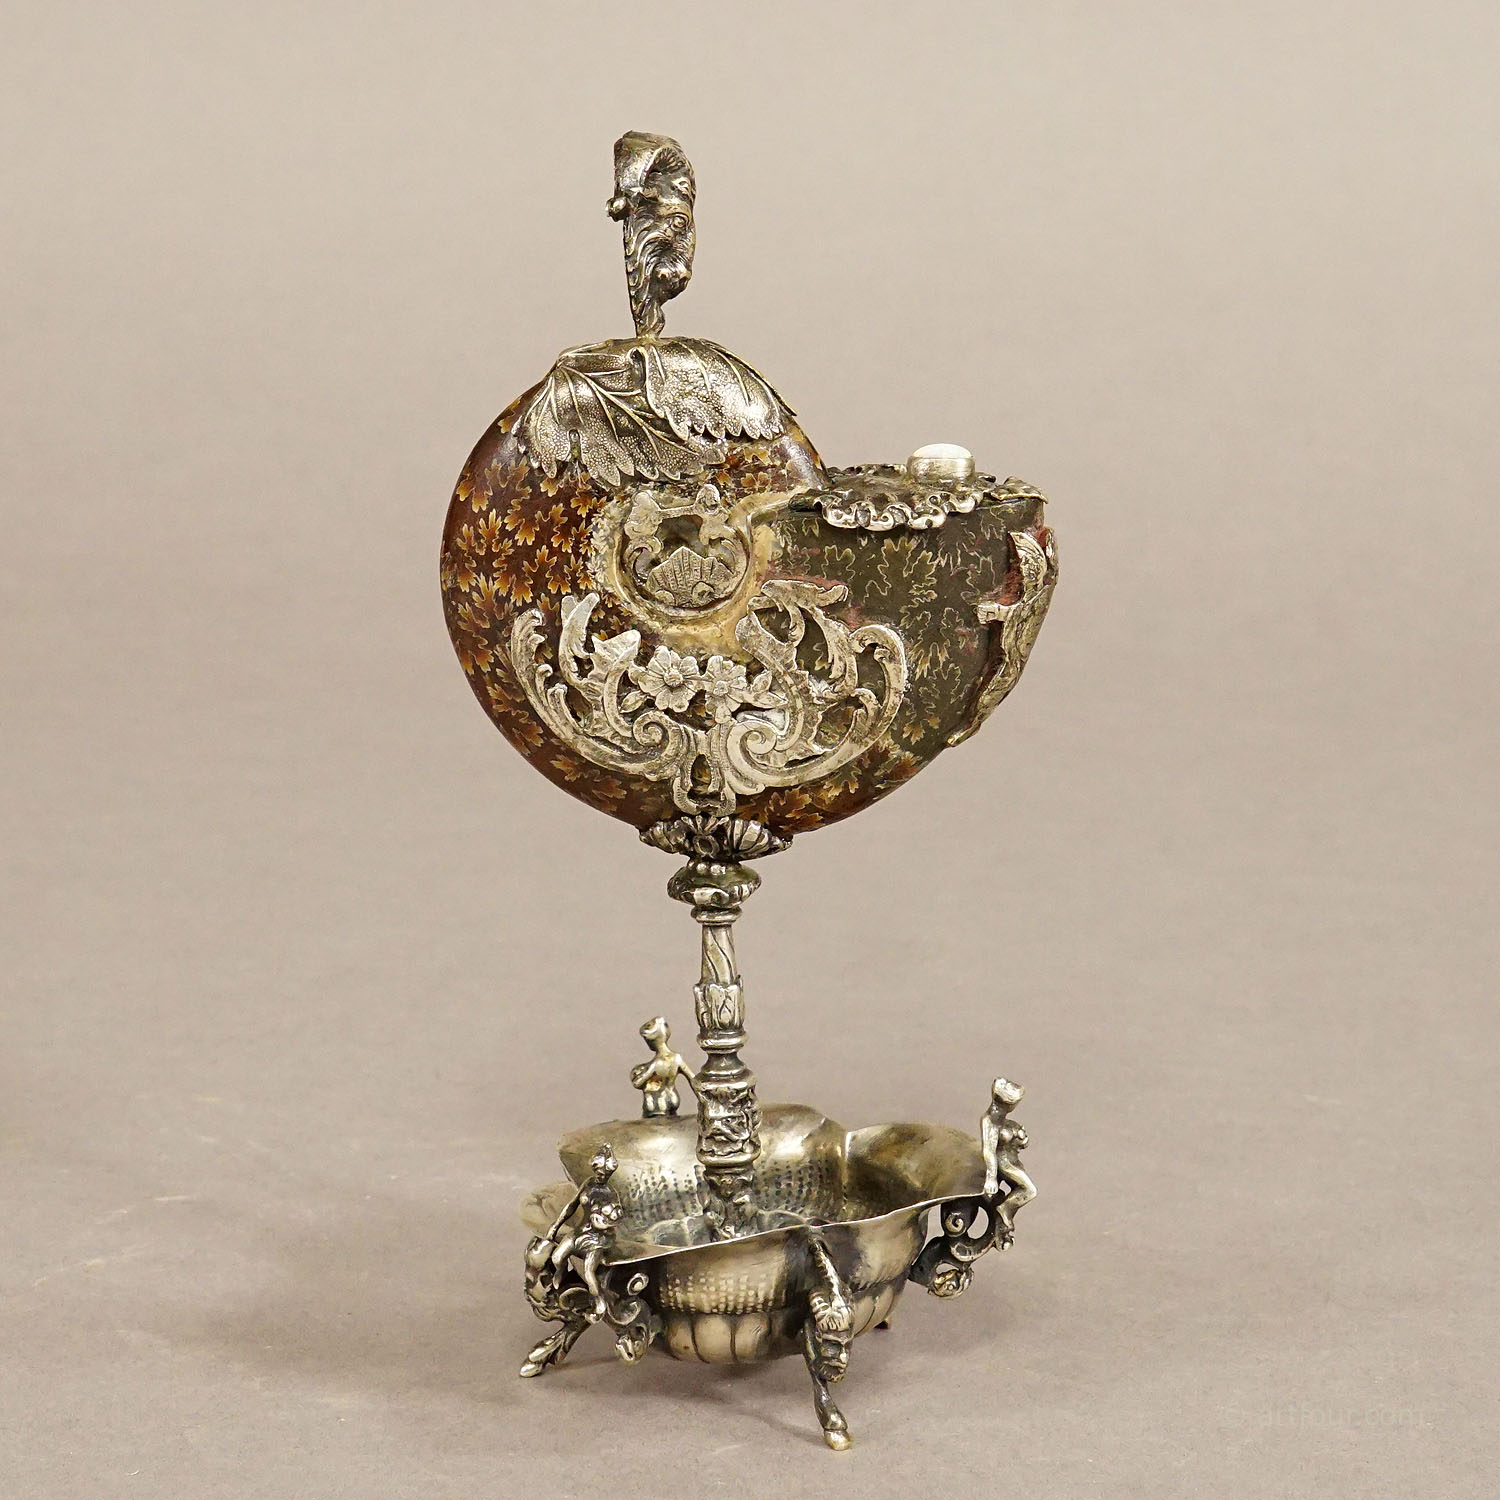 Antique Wunderkammer Installation of a Ammonite with Silver Mounting